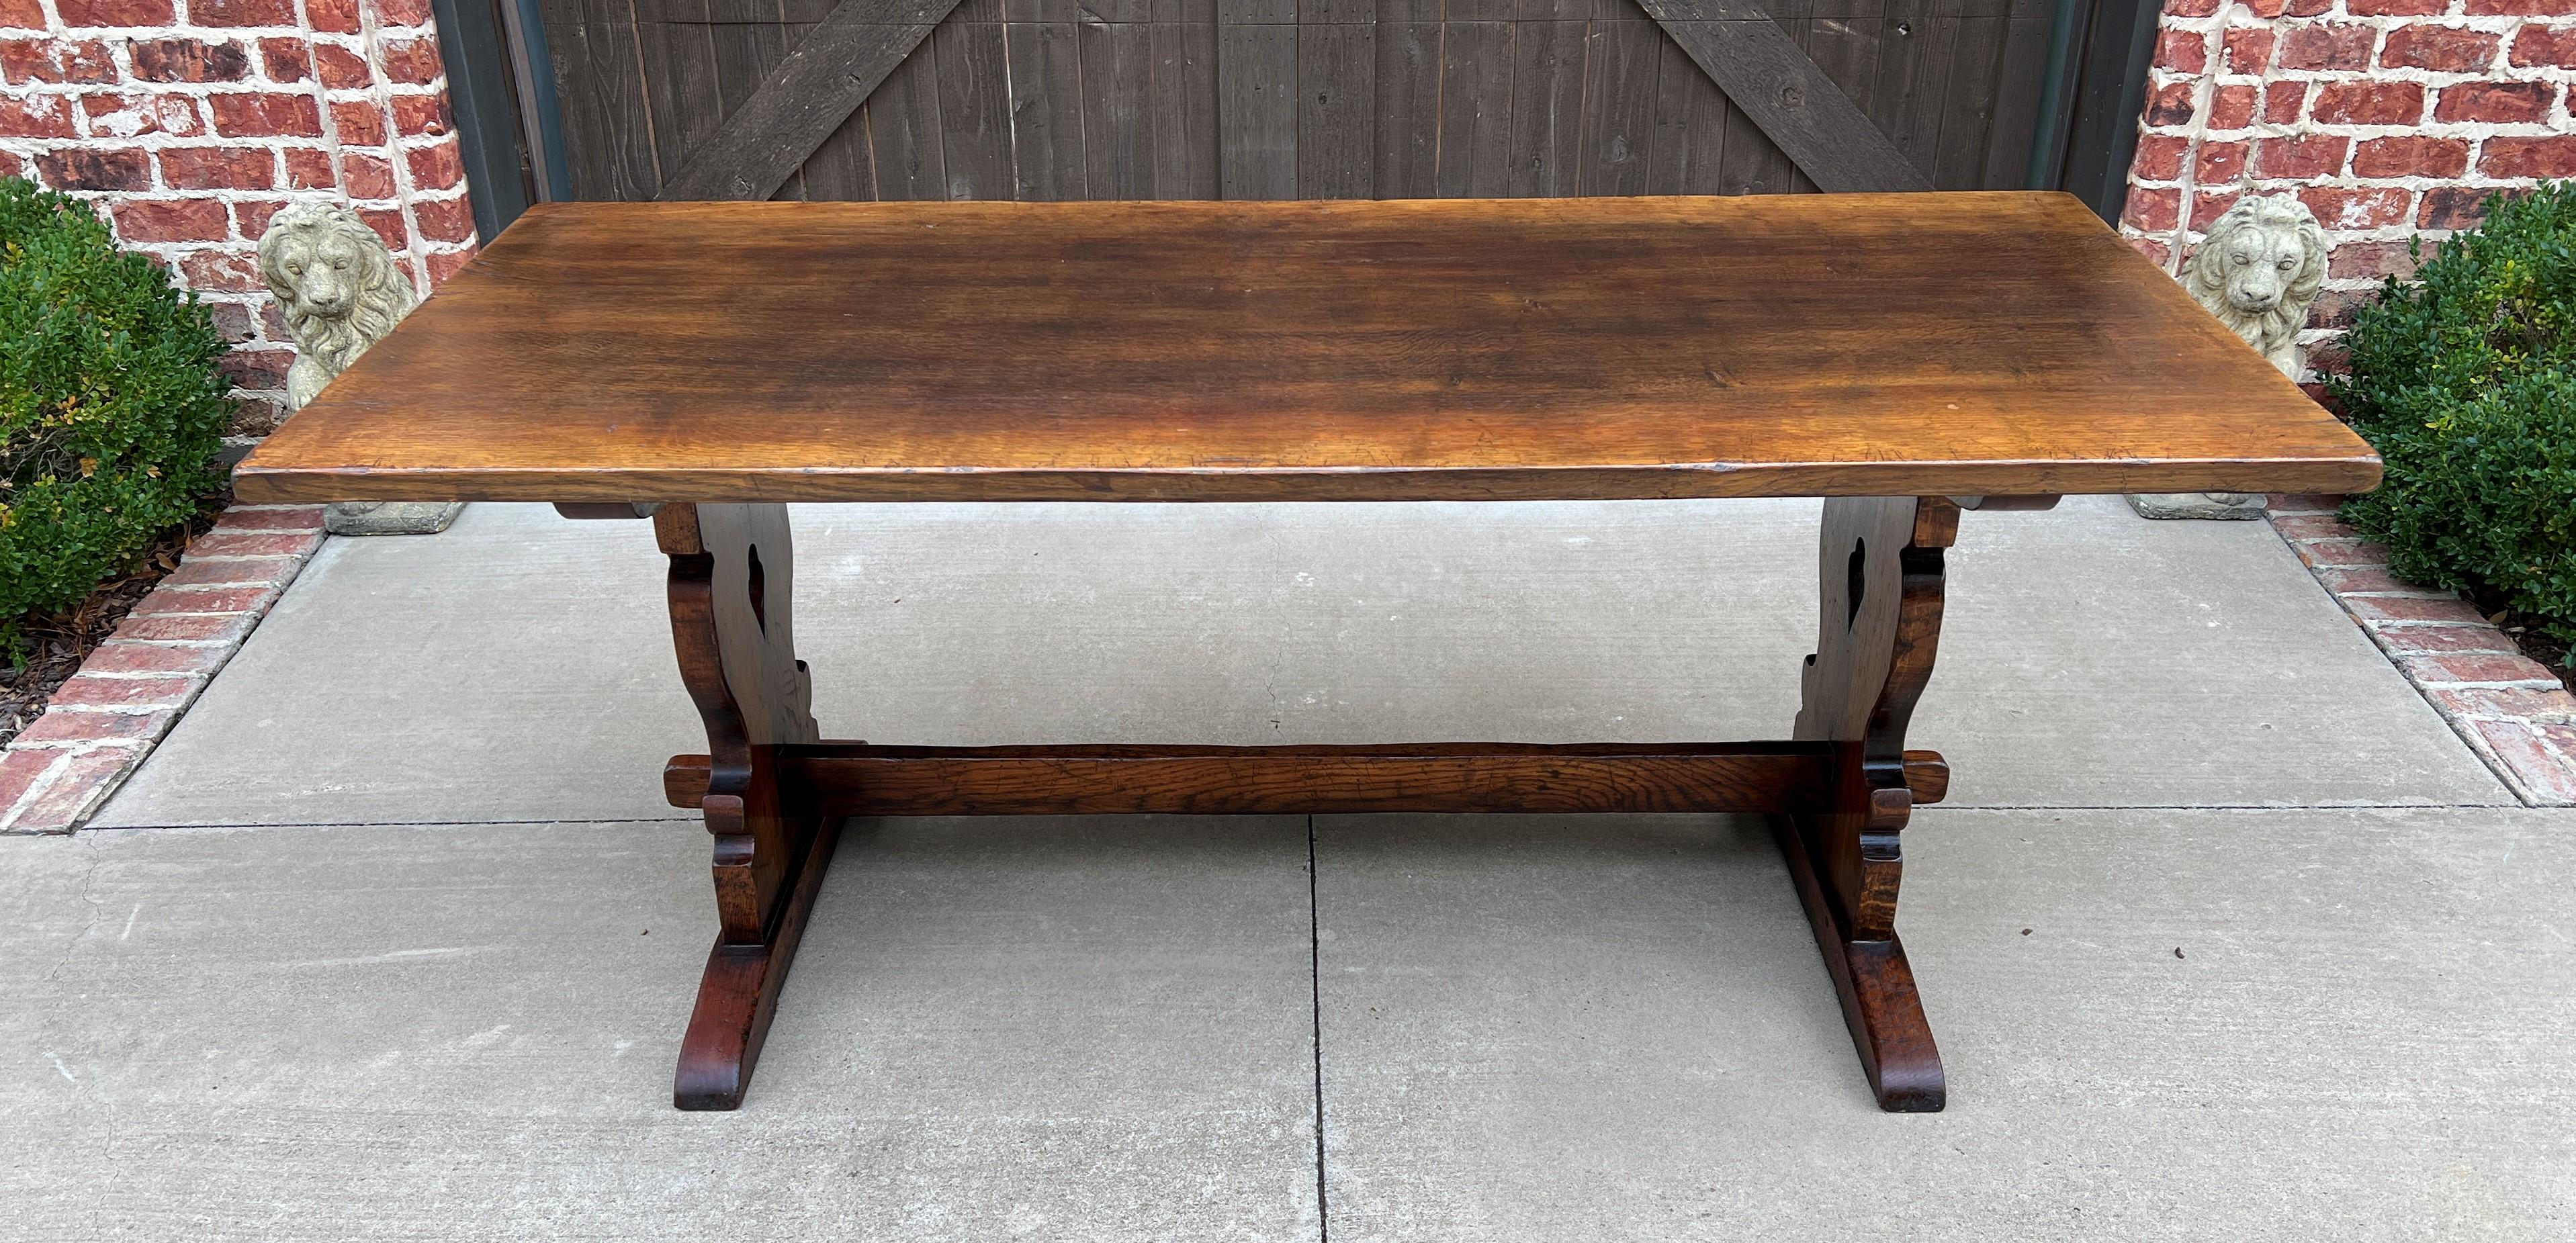 Charming antique French country Farm Farmhouse Breakfast Dining Table or Desk with Trestle Base~~c. 1920s

This table has 